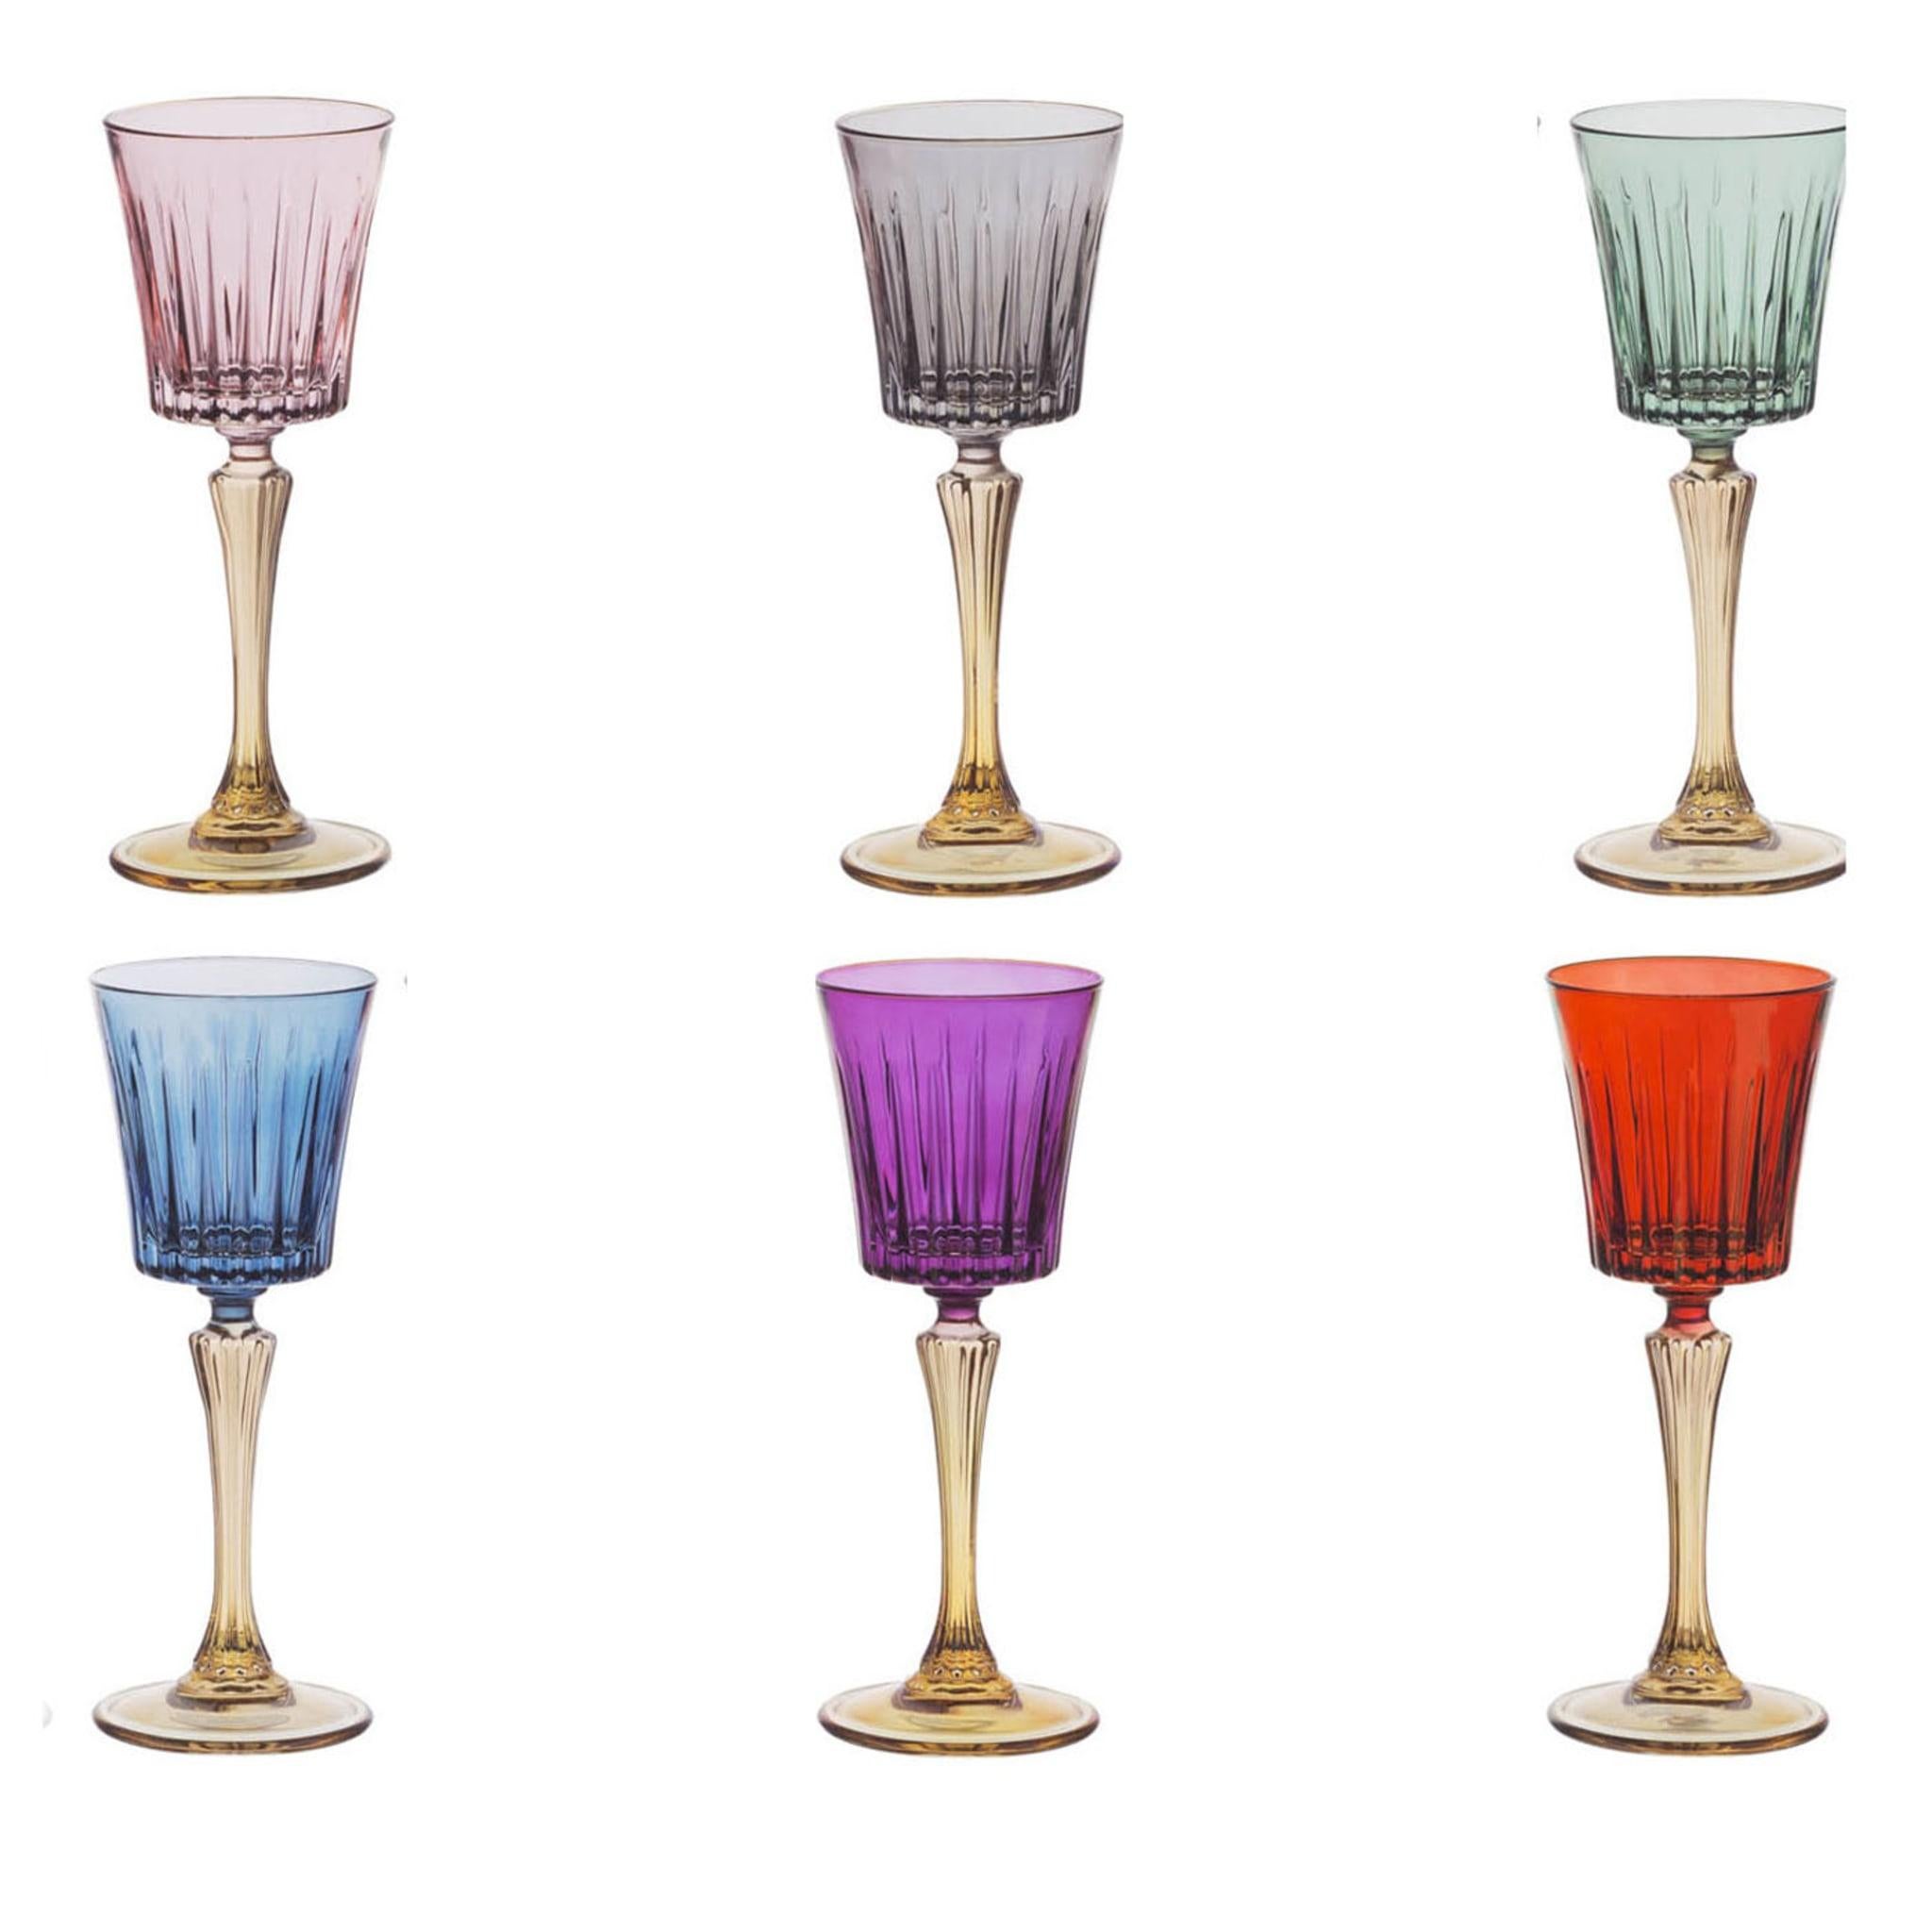 Each of these handmade liquor chalices features a stem and base in a smoky transparent glass shade. The cup section of each chalice bares its own distinct color to suit many different tastes.